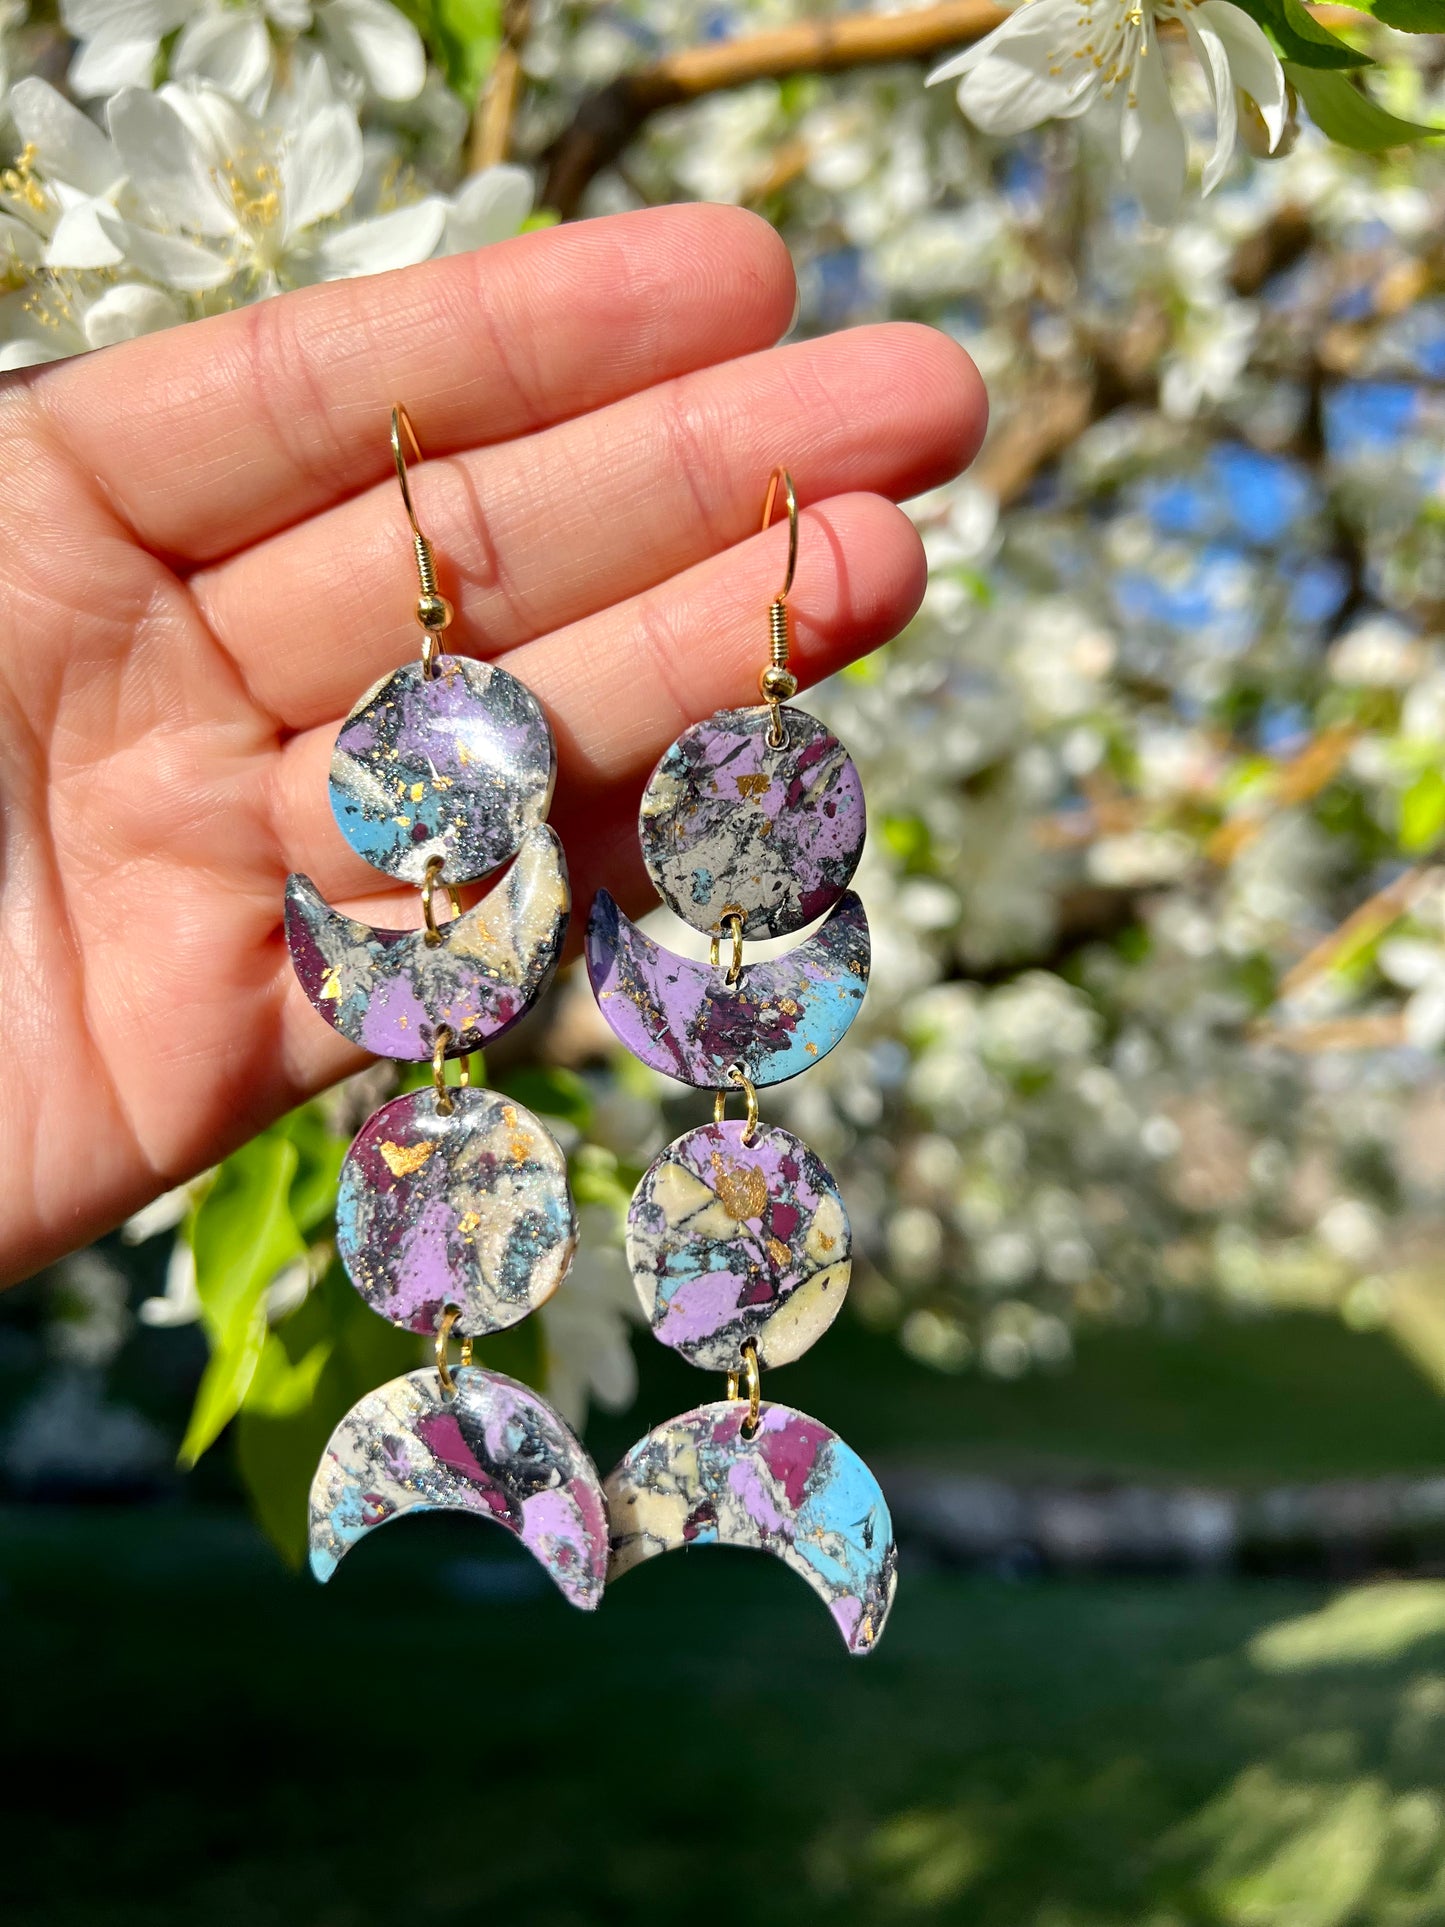 Experience the symbolism of life's rhythm and feminine power with these earrings. New Moons herald new chapters, while waning crescents encourage the manifestation of dreams and aspirations